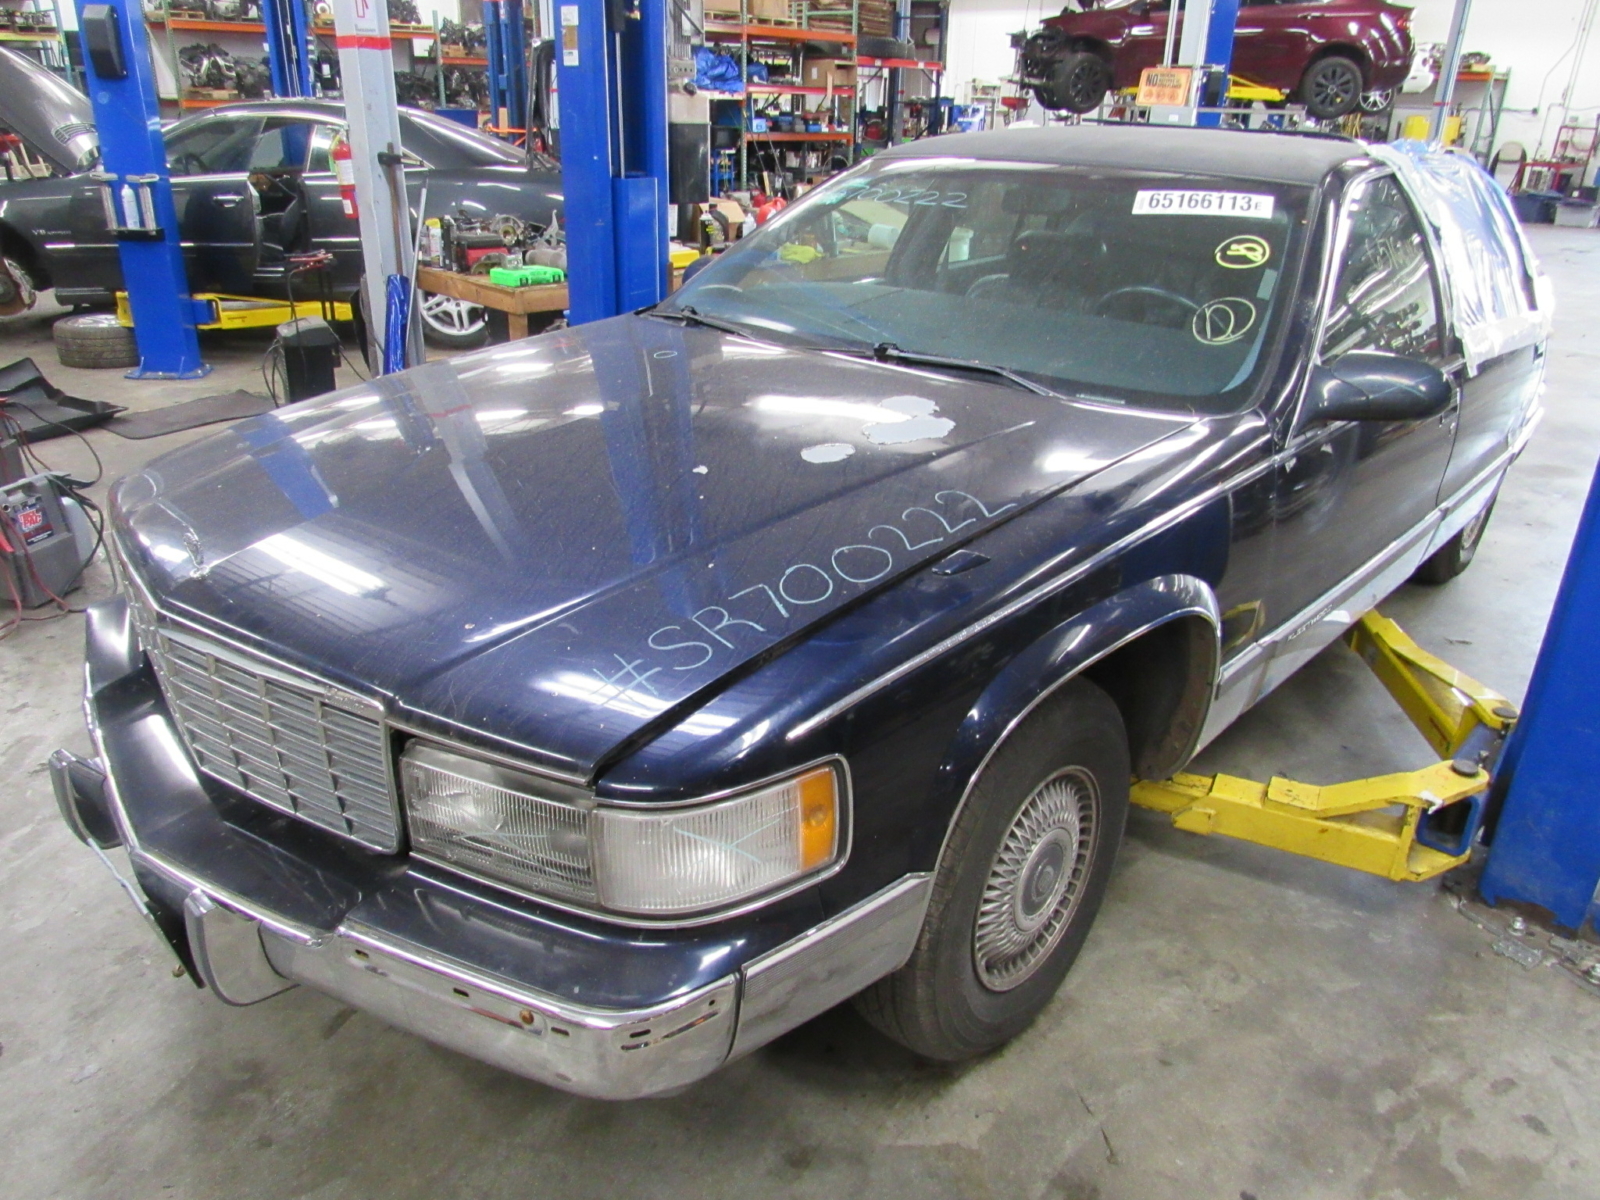 95 Cadillac Fleetwood BROUGHAM 118K Miles LT1 4L60 In for Parts 10-3-23